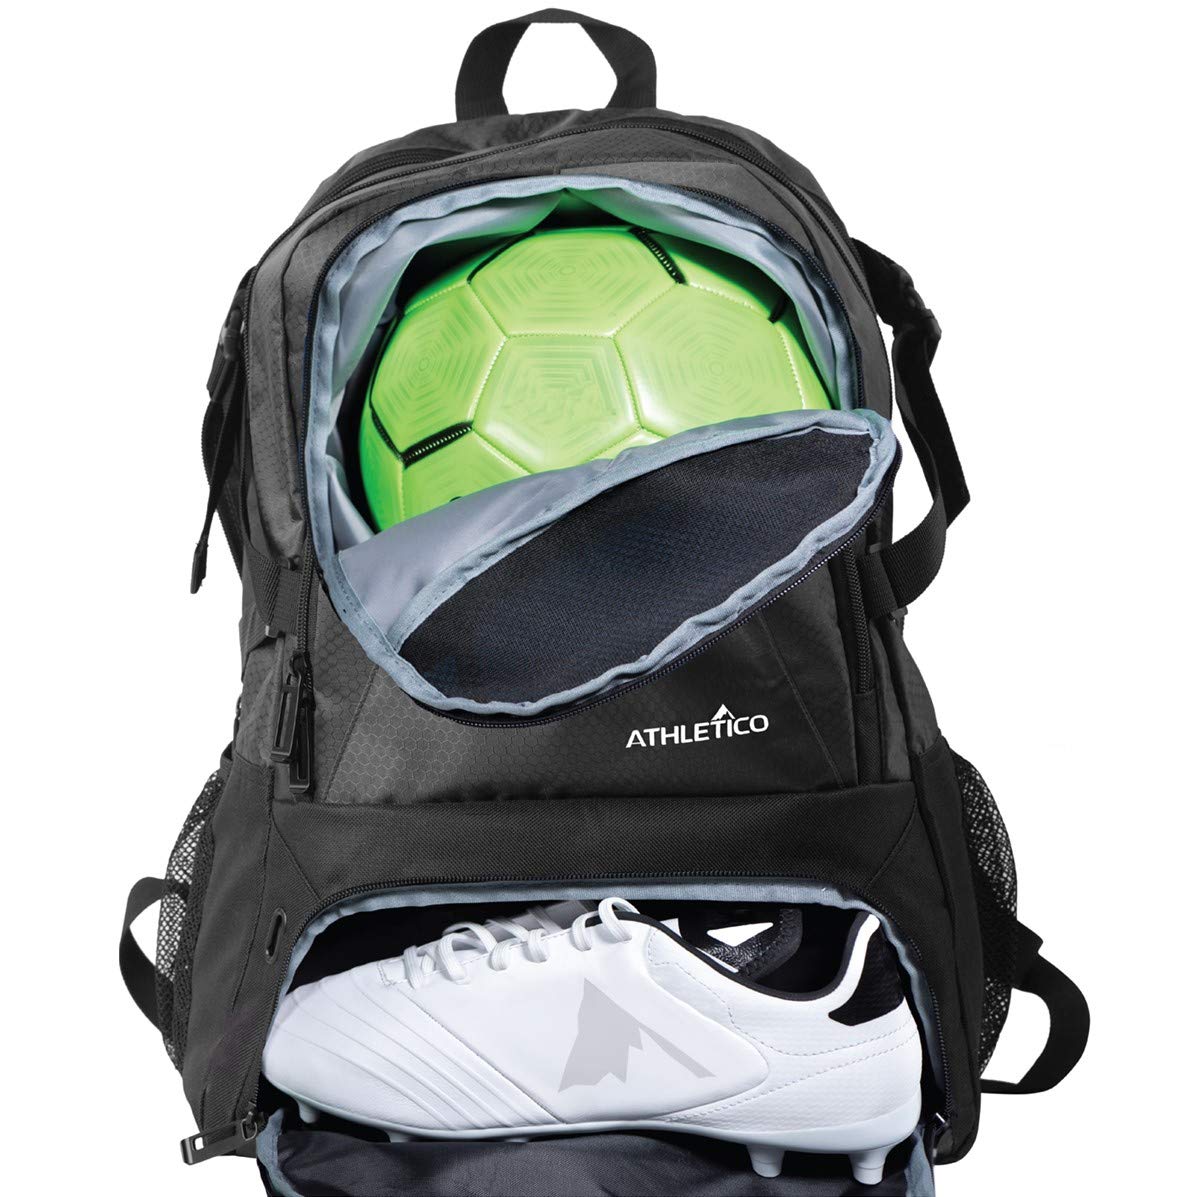 Athletico National Soccer Bag - Backpack for Soccer, Basketball & Football Includes Separate Cleat and Ball Holder (Black)